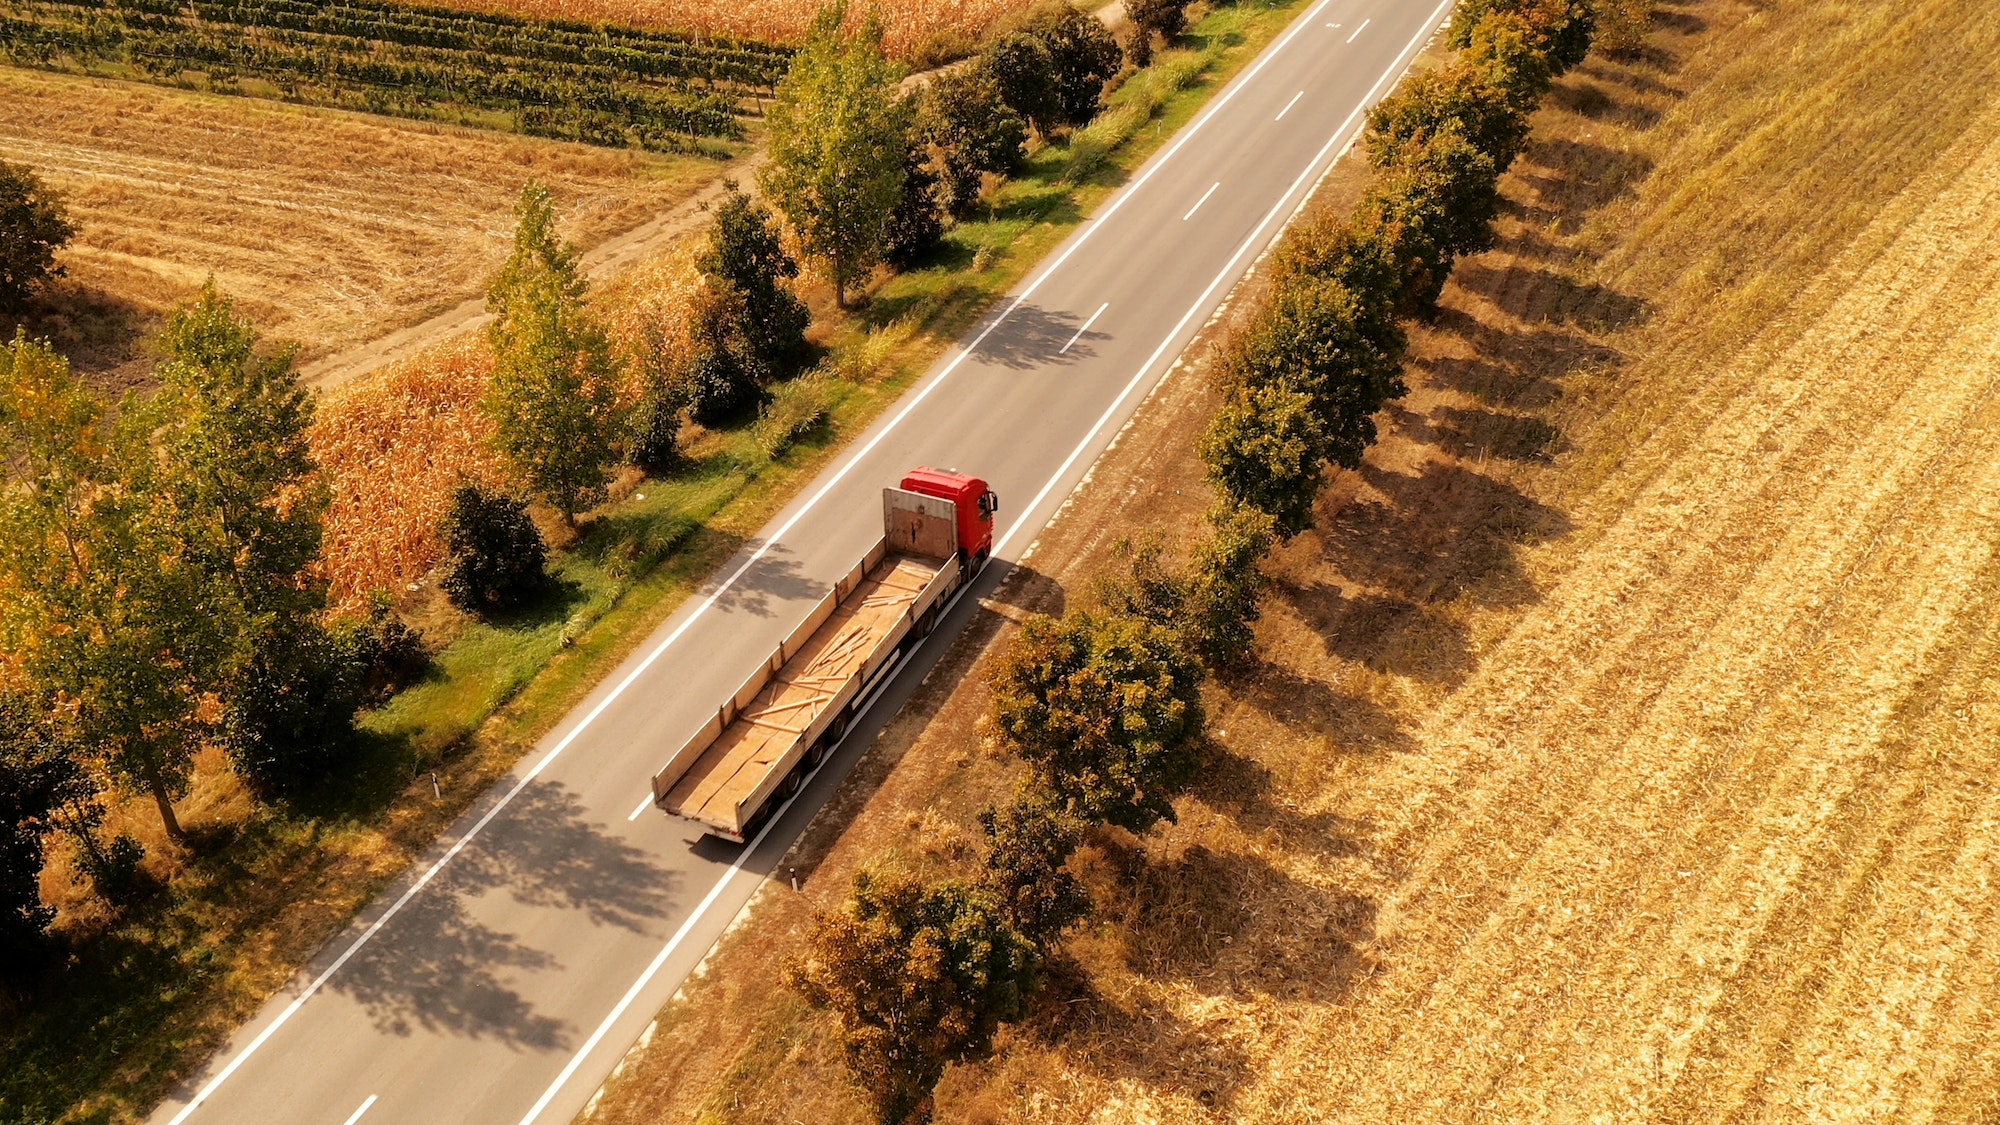 Truck on the road through countryside, aerial view